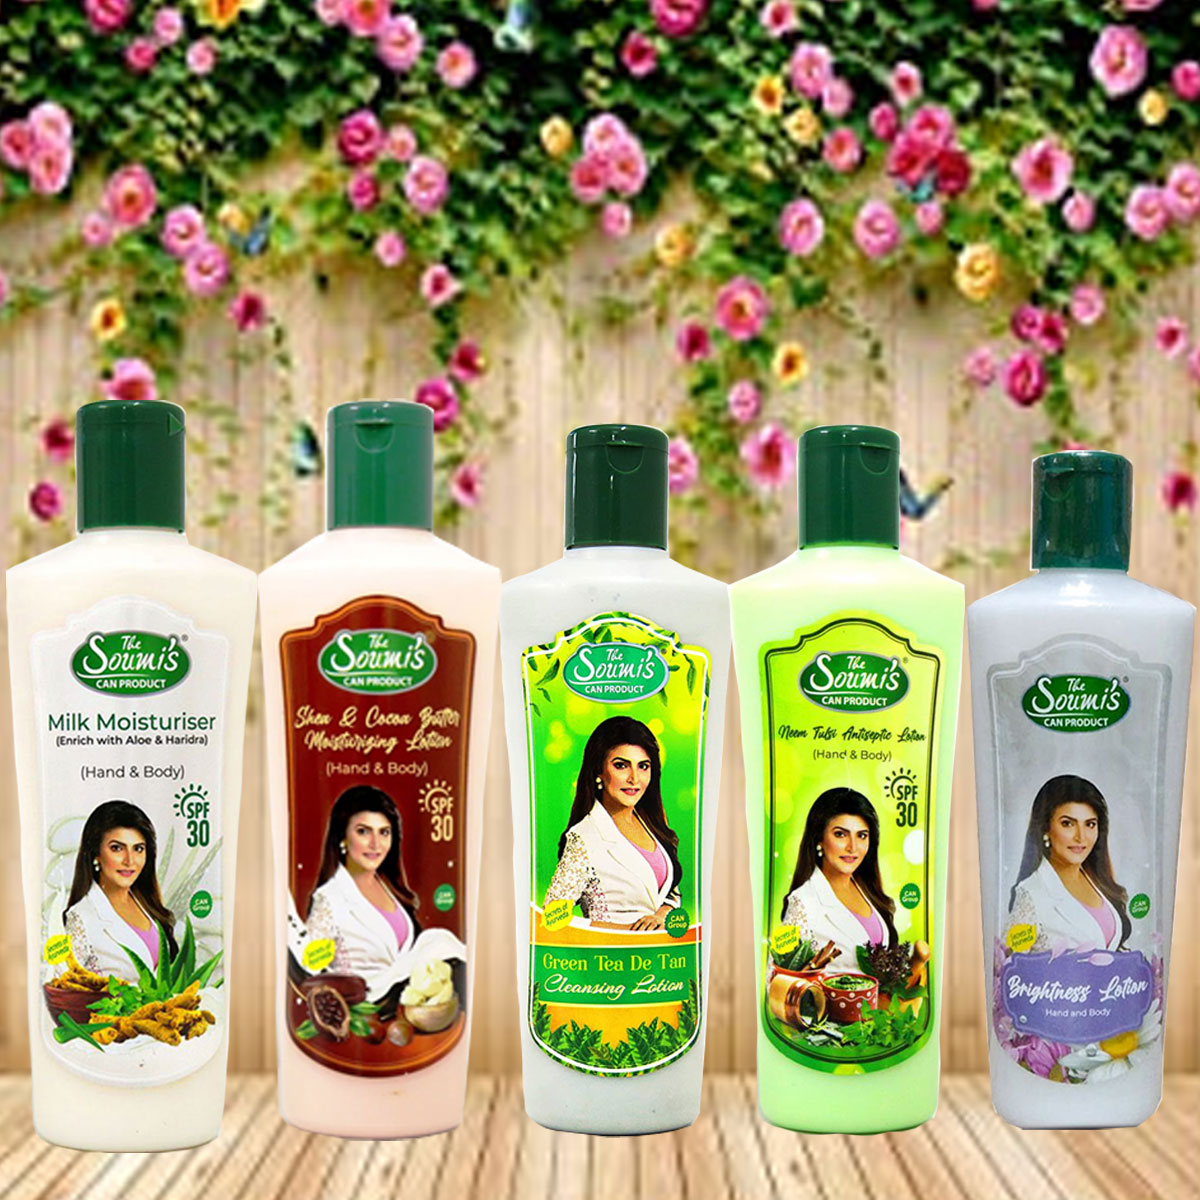 The Soumi’s Can Product – Available Hand & Body Lotion